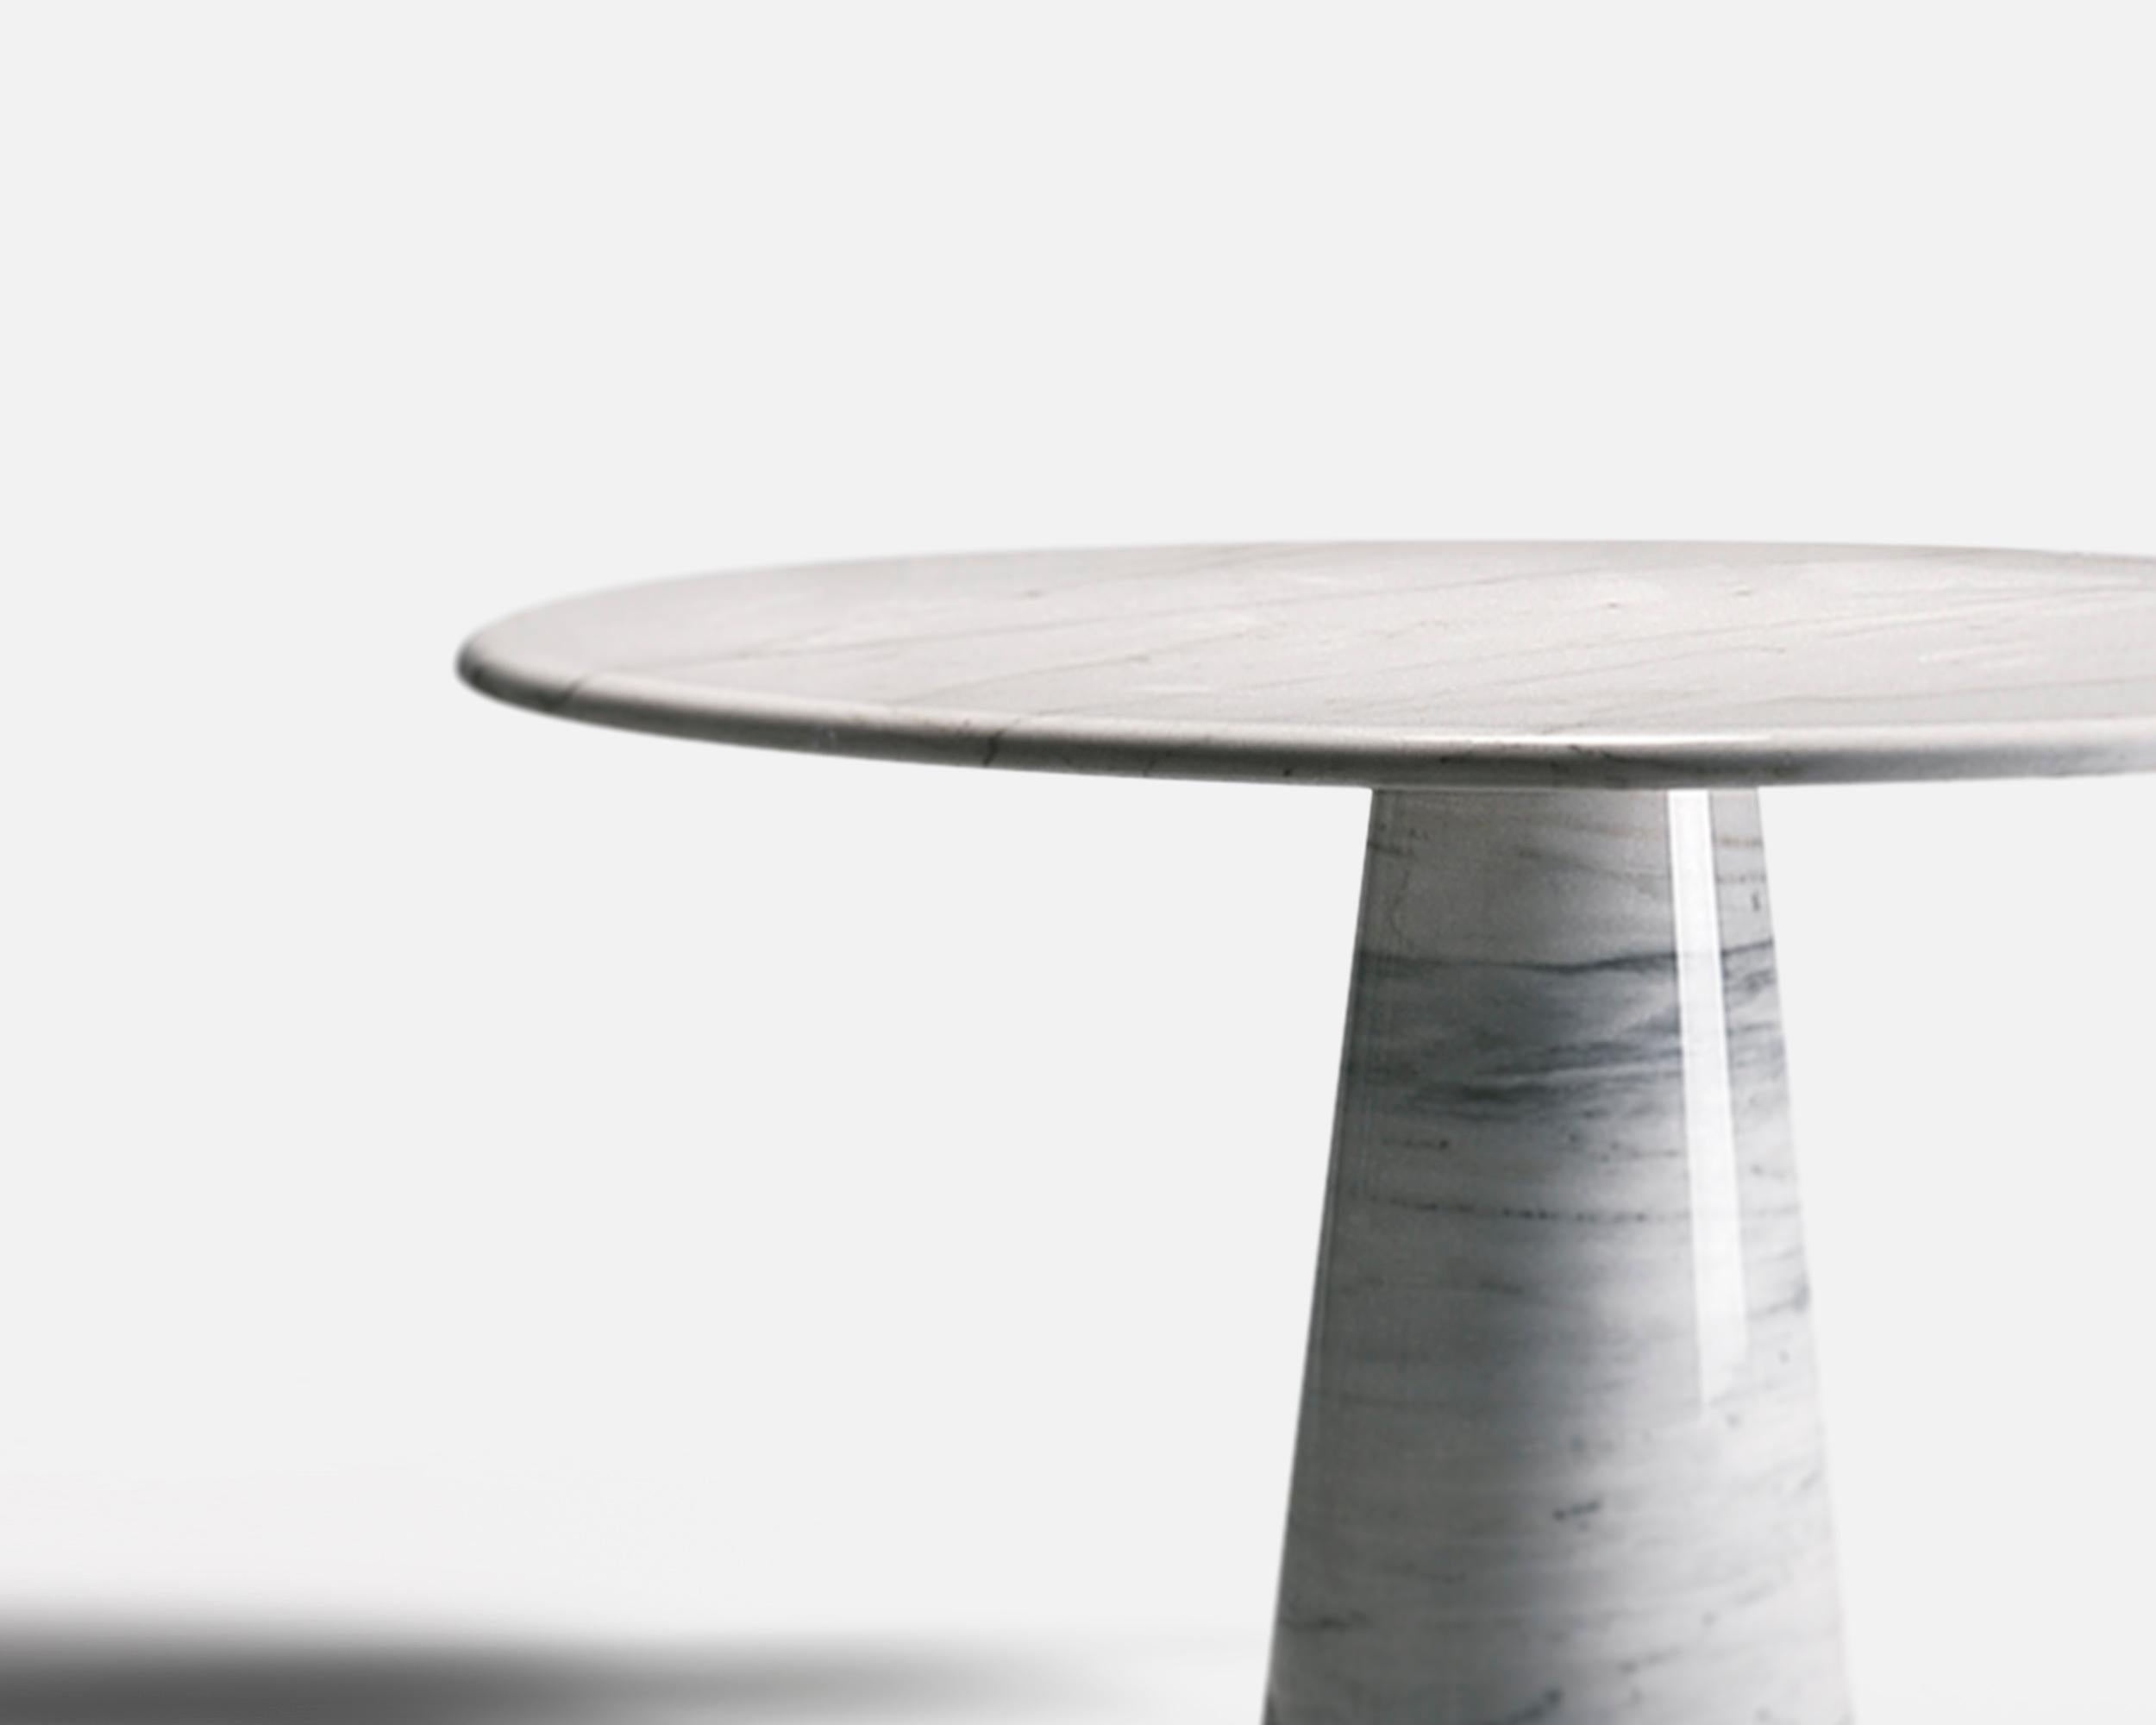 'Colonnata' round dining table in silver travertine
Design by Pier Alessandro Giusti & Egidio Di Rosa.
1970s

Dimensions: H. 72cm, D. 120cm
Material: marble, travertine, (wide range of stone types available)

Customization: 
This table is still